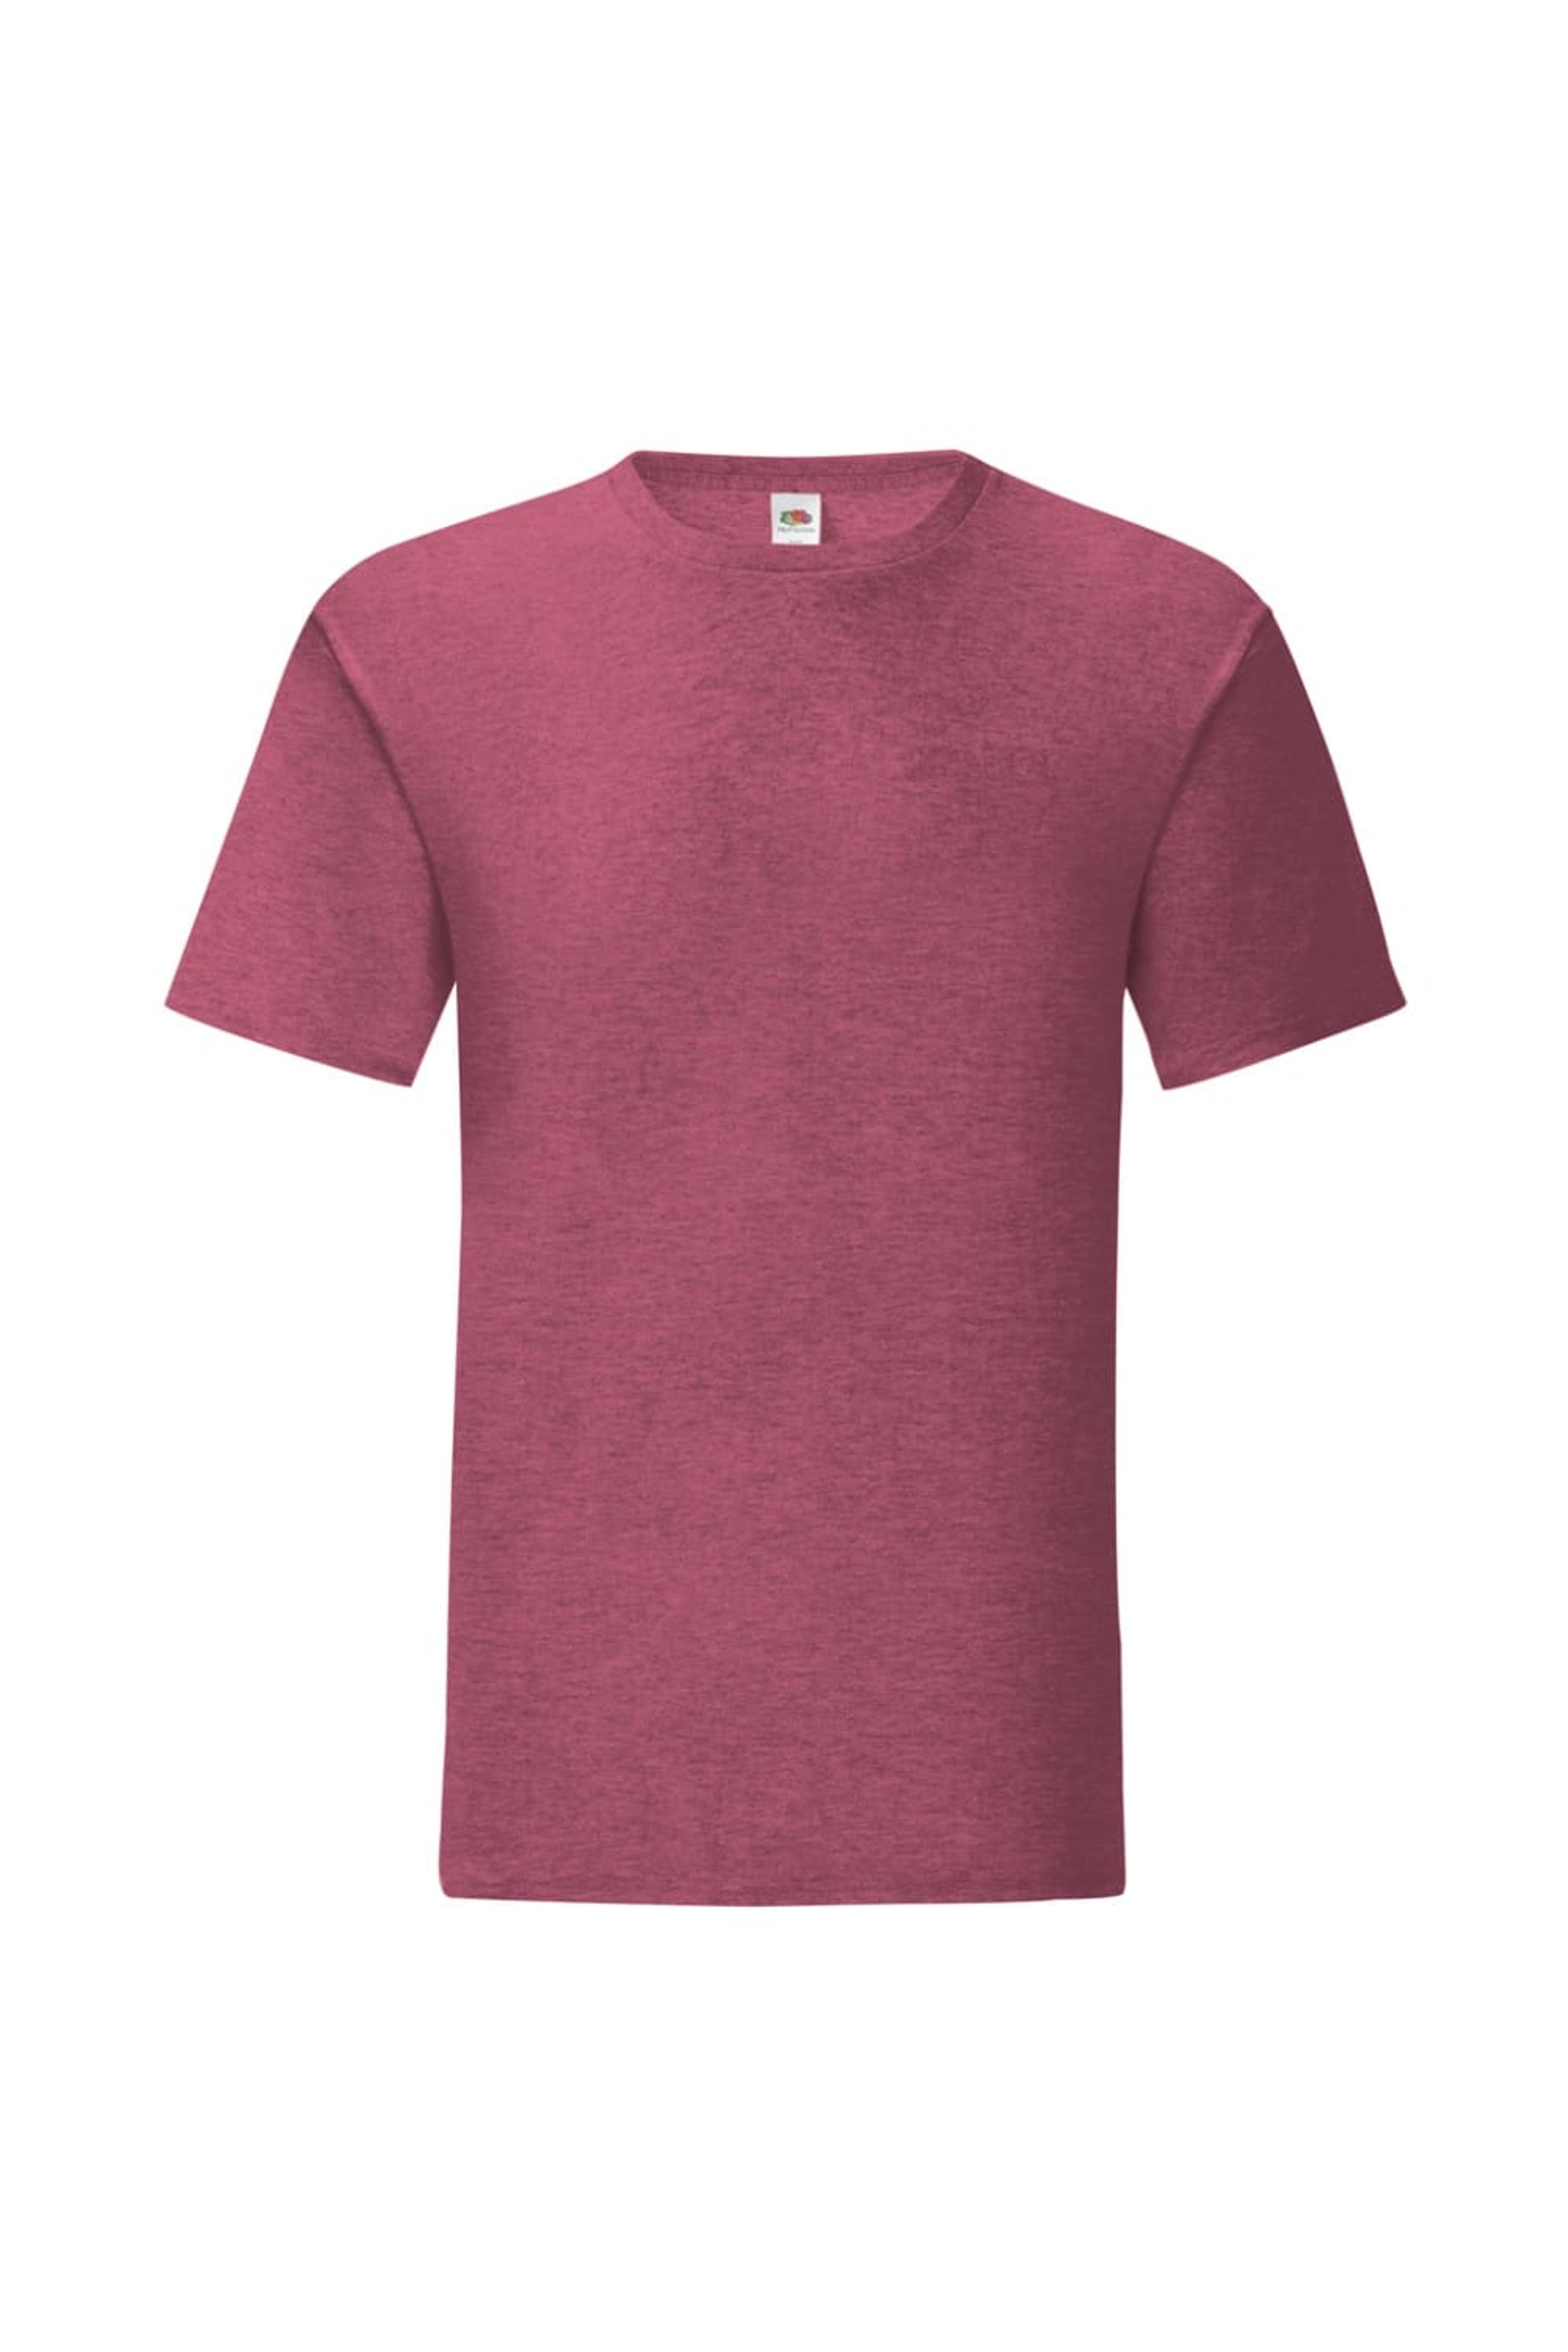 FRUIT OF THE LOOM FRUIT OF THE LOOM FRUIT OF THE LOOM MENS ICONIC T-SHIRT (PACK OF 5) (HEATHER BURGUNDY)